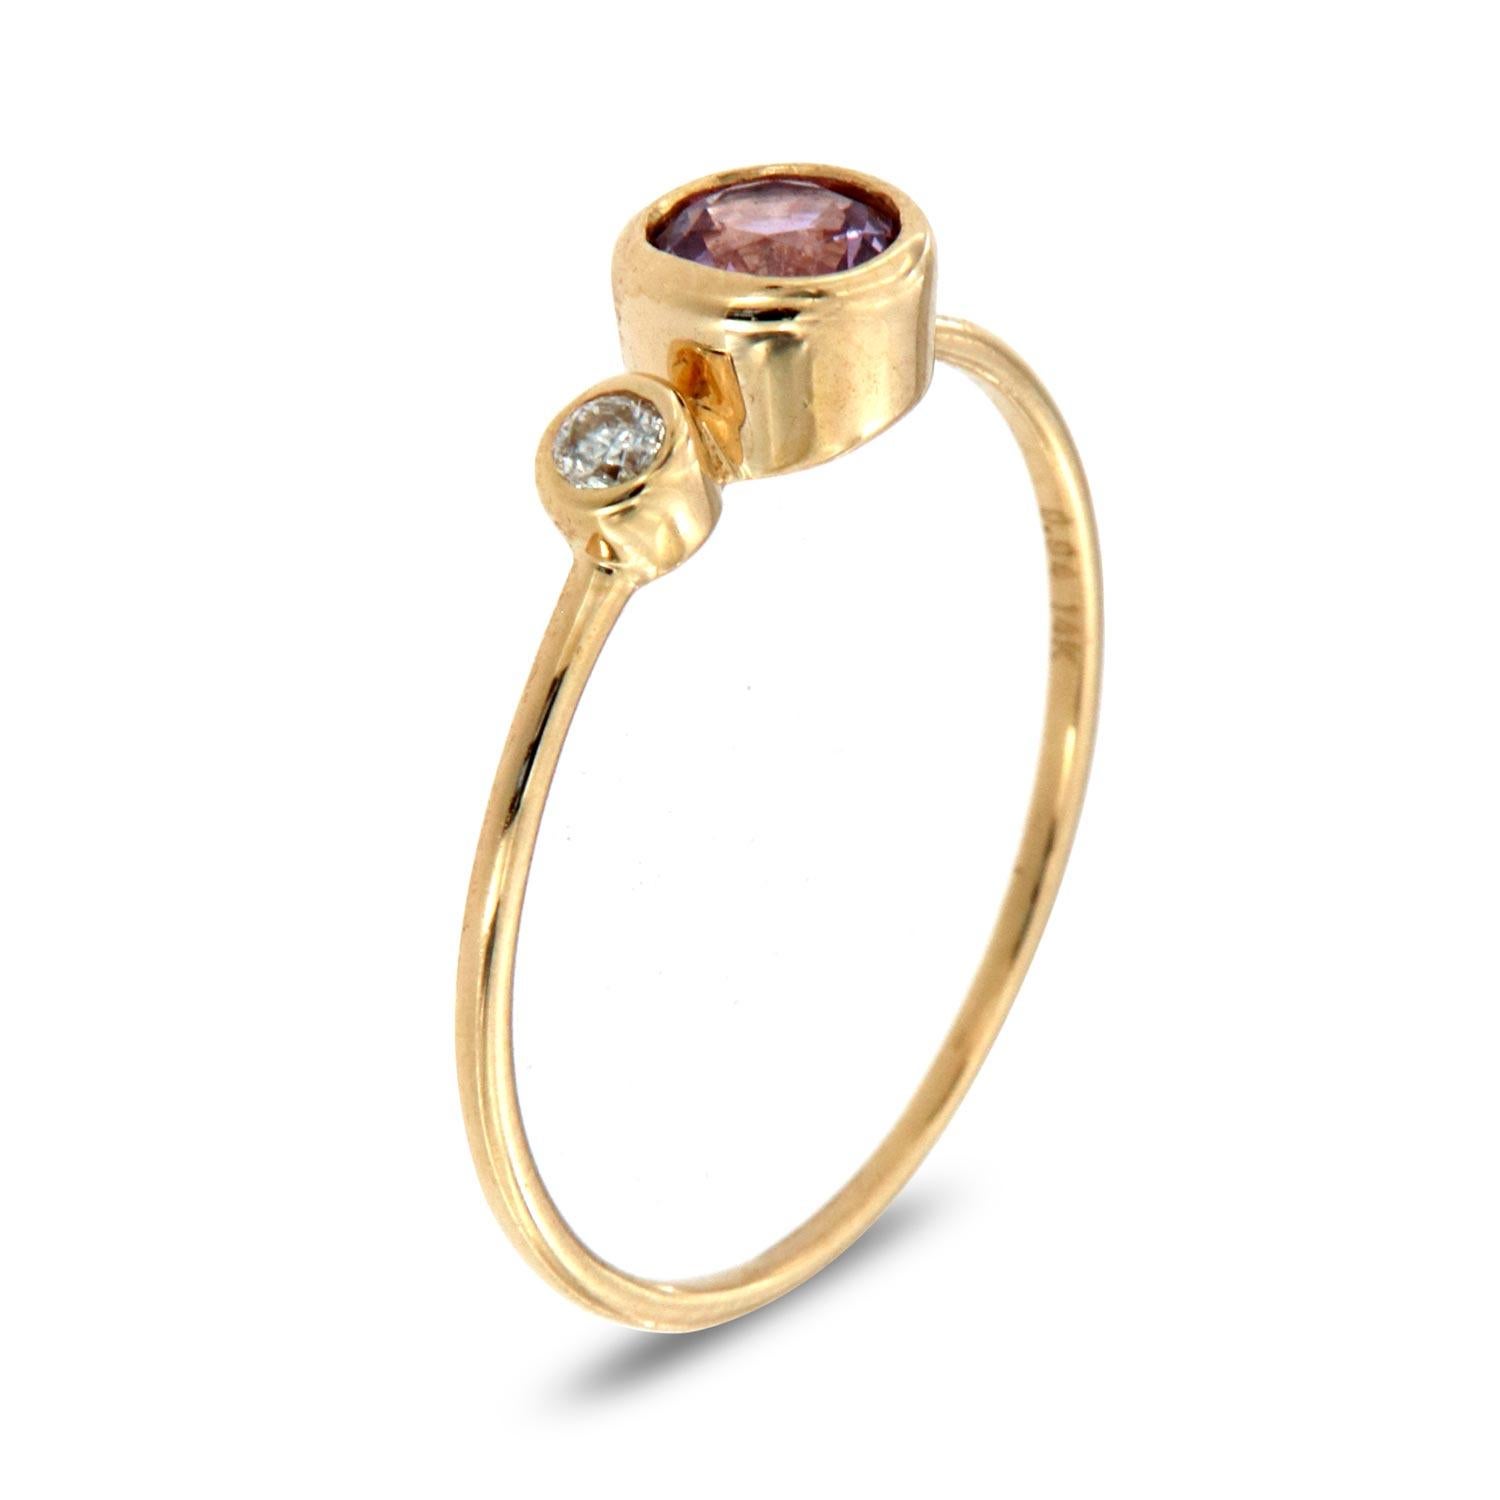 This petite fashion ring is impressive in its vintage appeal, featuring a bezeled natural purpulish pink round brilliant sapphire, accented with round brilliant diamond. Experience the difference in person!

Product details: 

Center Gemstone Type: